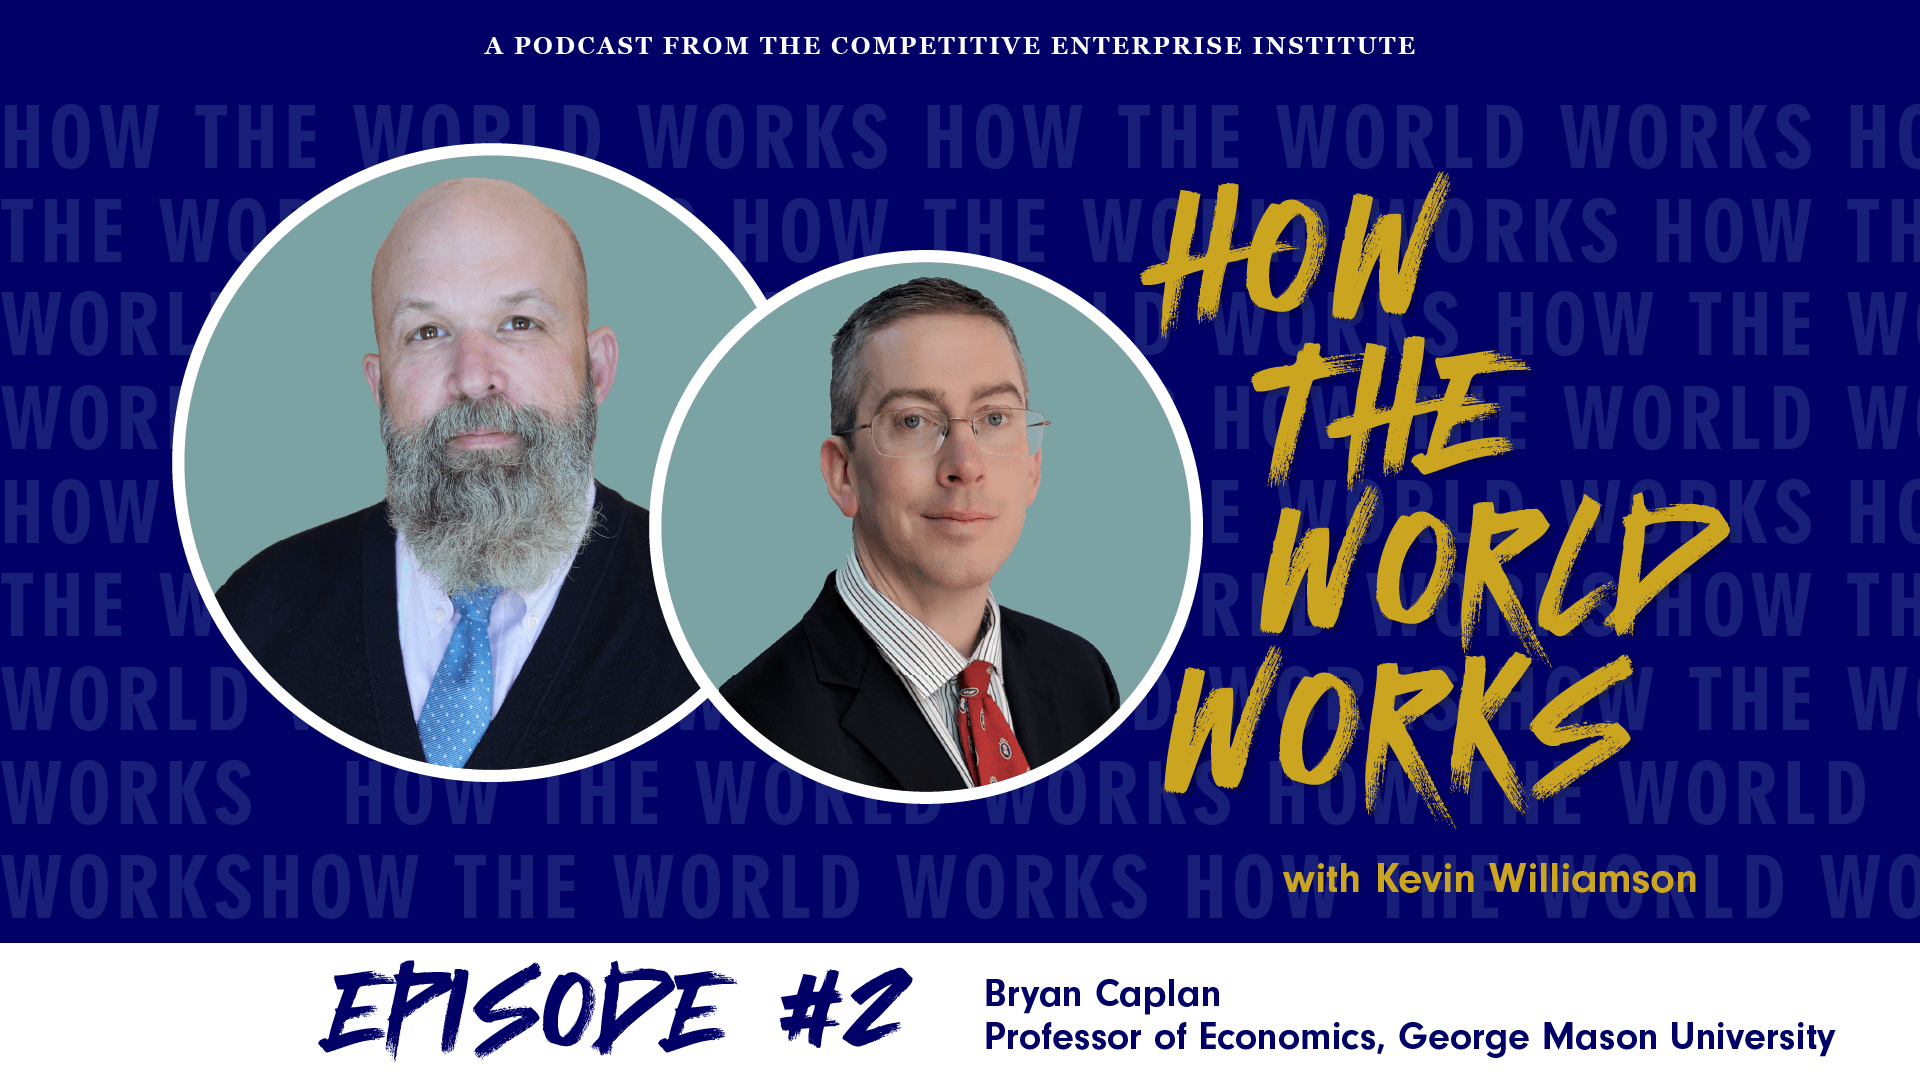 How the World Works Podcast with Guest Bryan Caplan